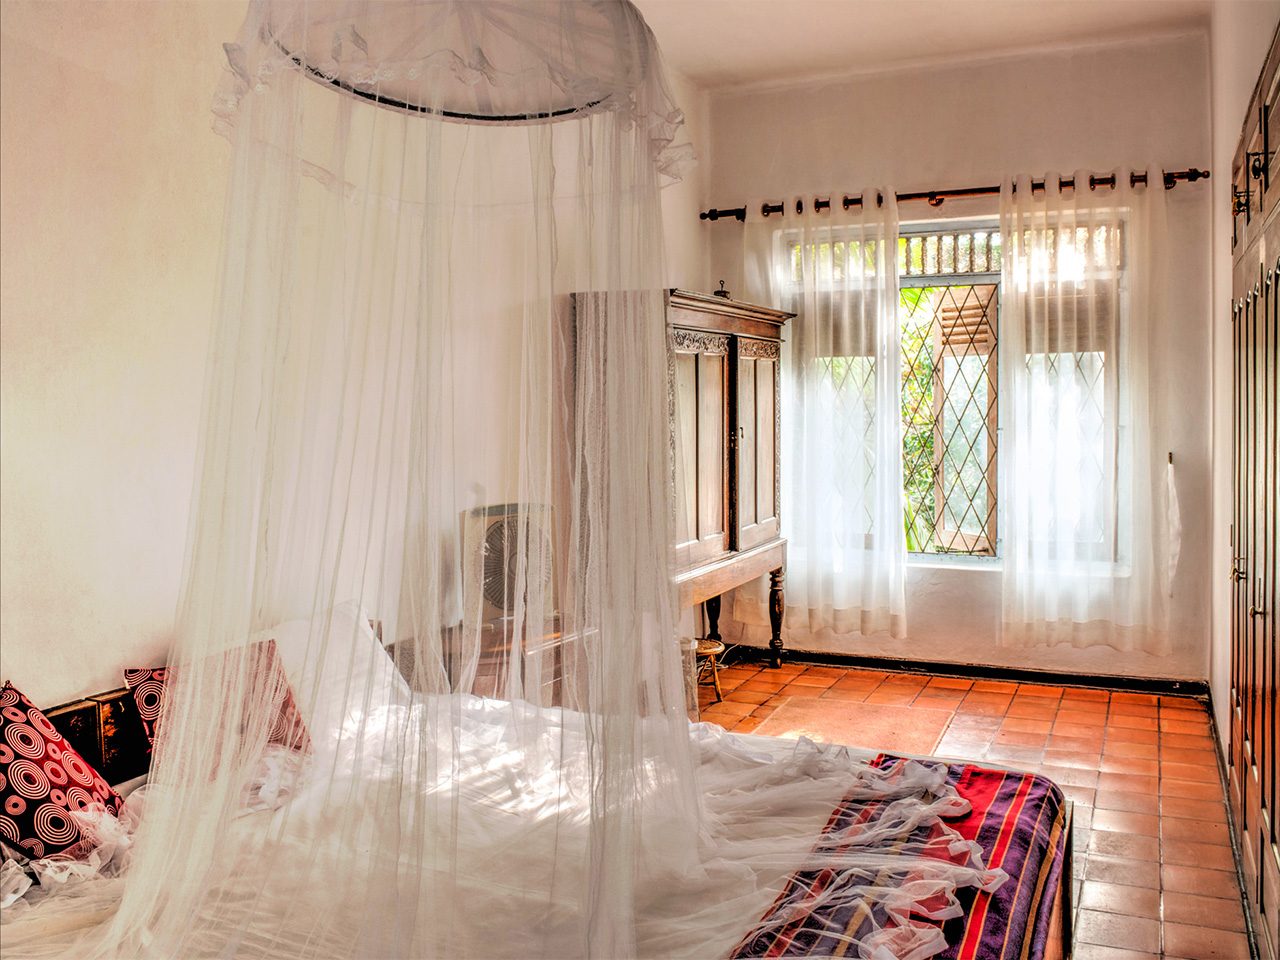 A mosquito net hanging above a bed in a colonial style bedroom with tile floor.